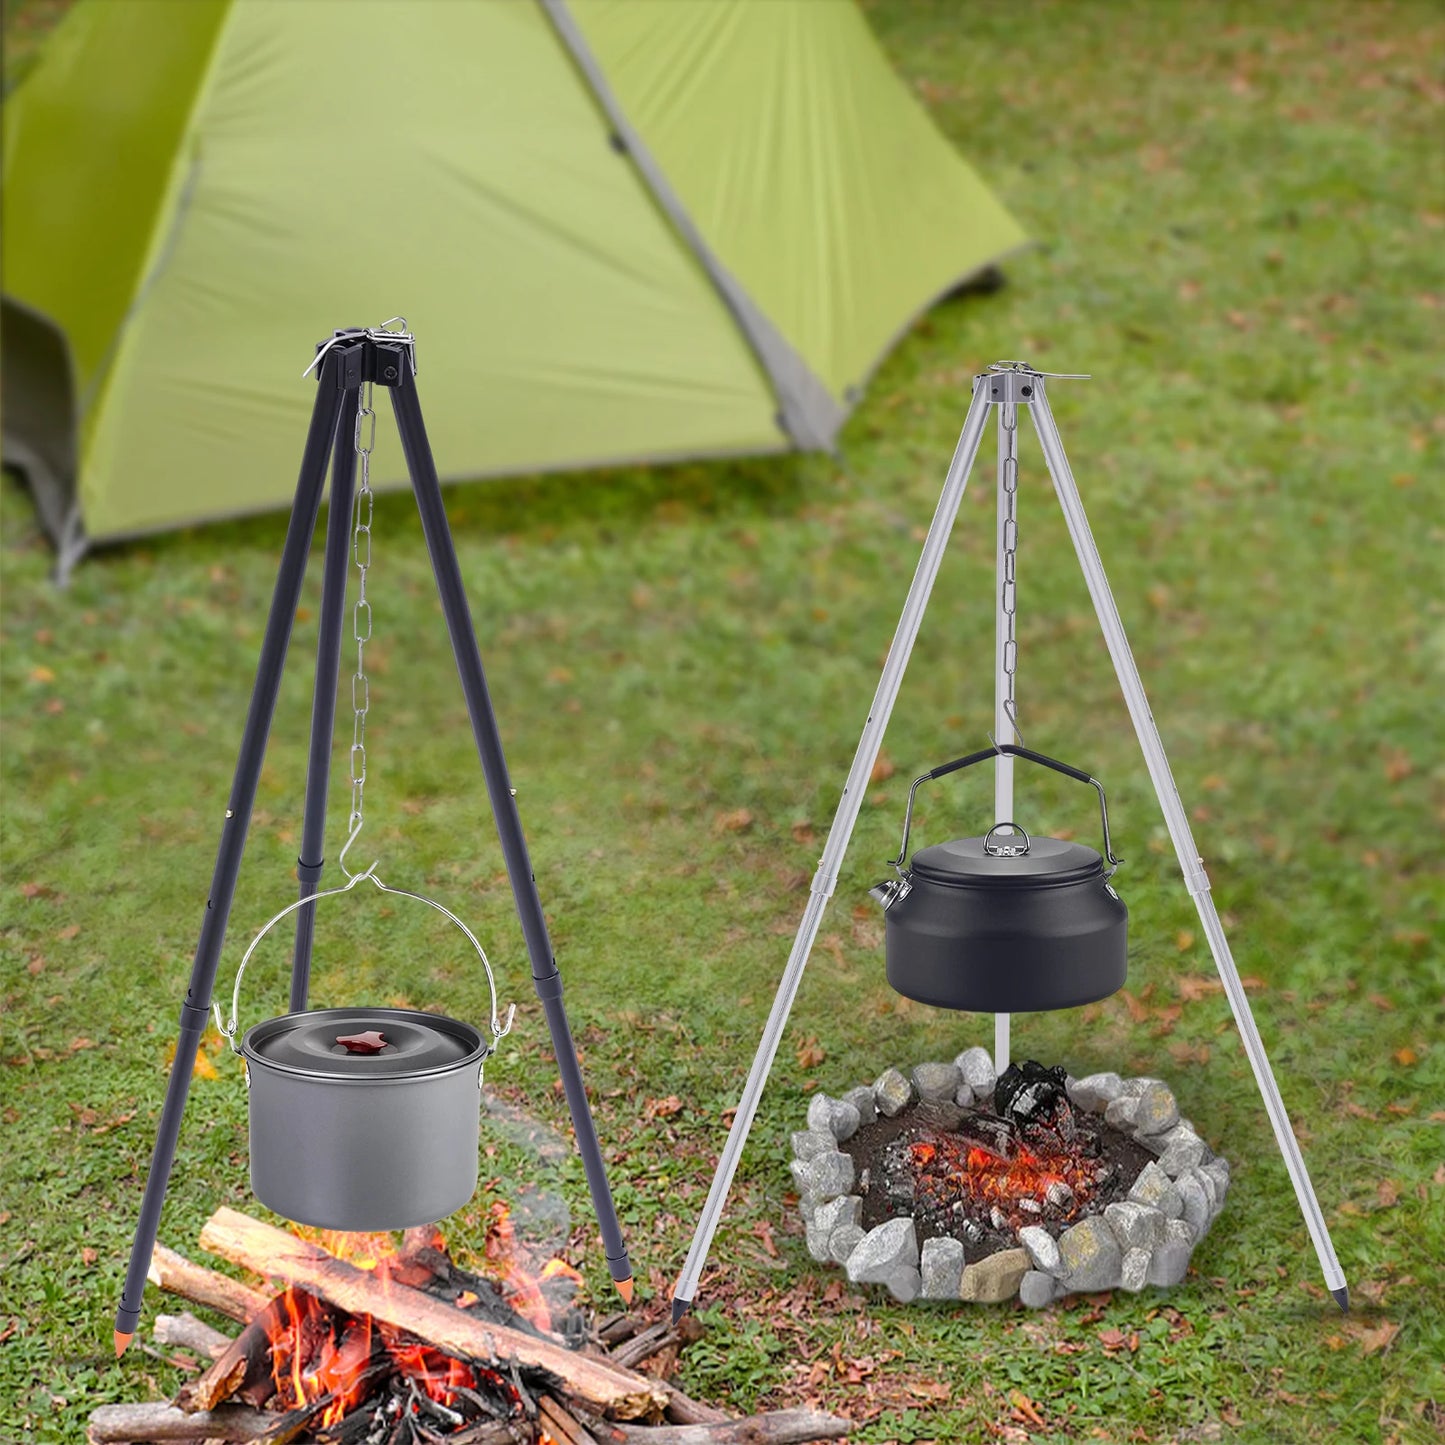 Portable BBQ Tripod Swivel Grill Rack Outdoor Barbecue Gallows Foldable Cooking Pot Holder